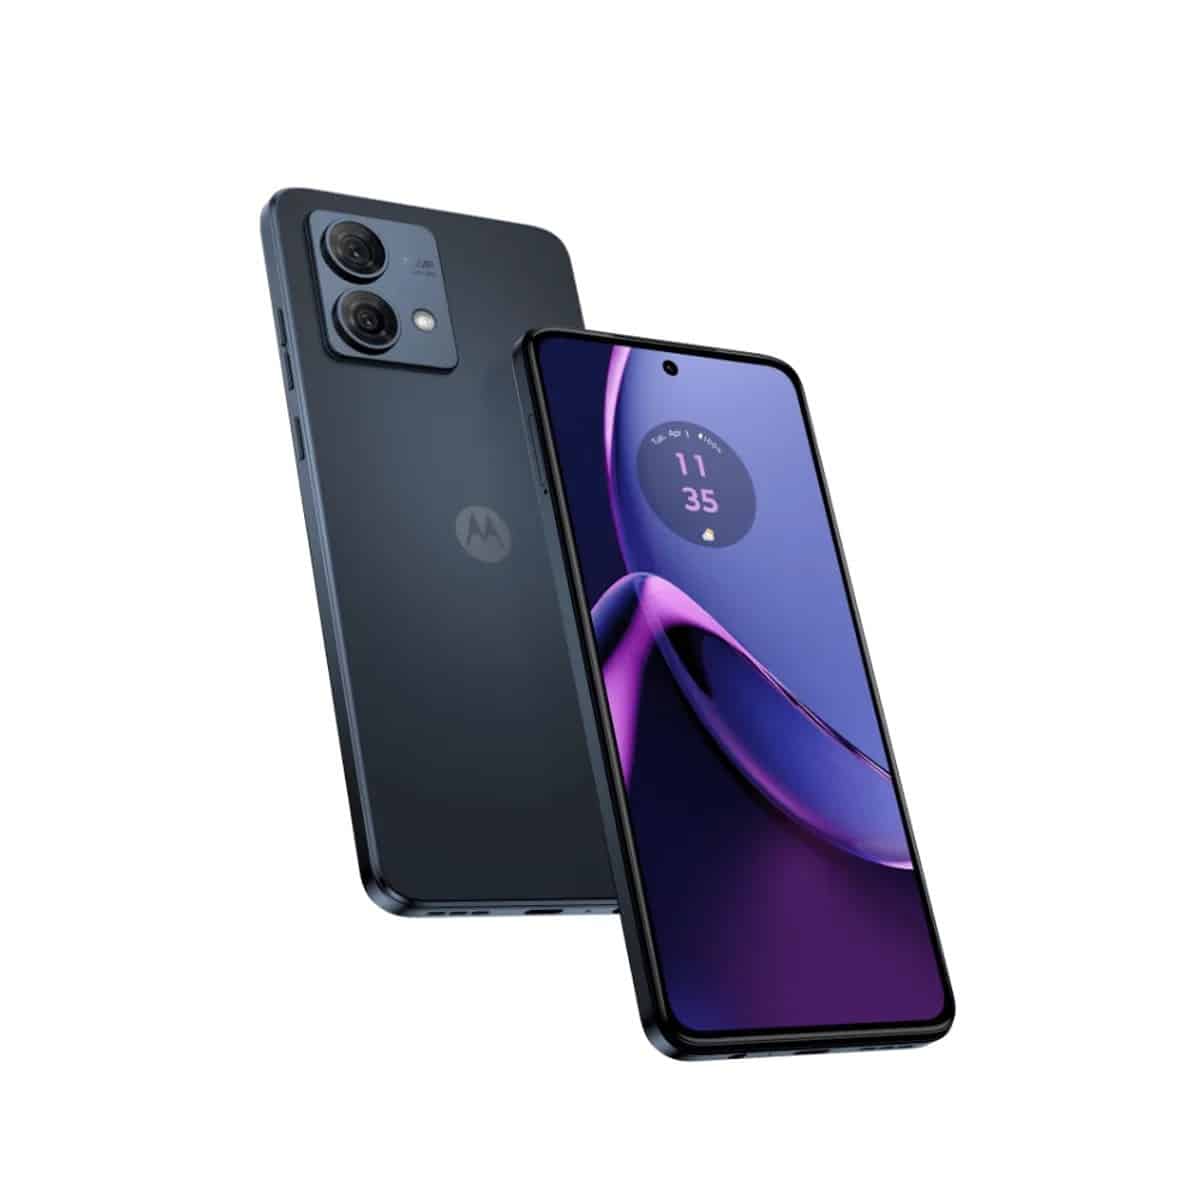 Moto G84 5G key specifications tipped